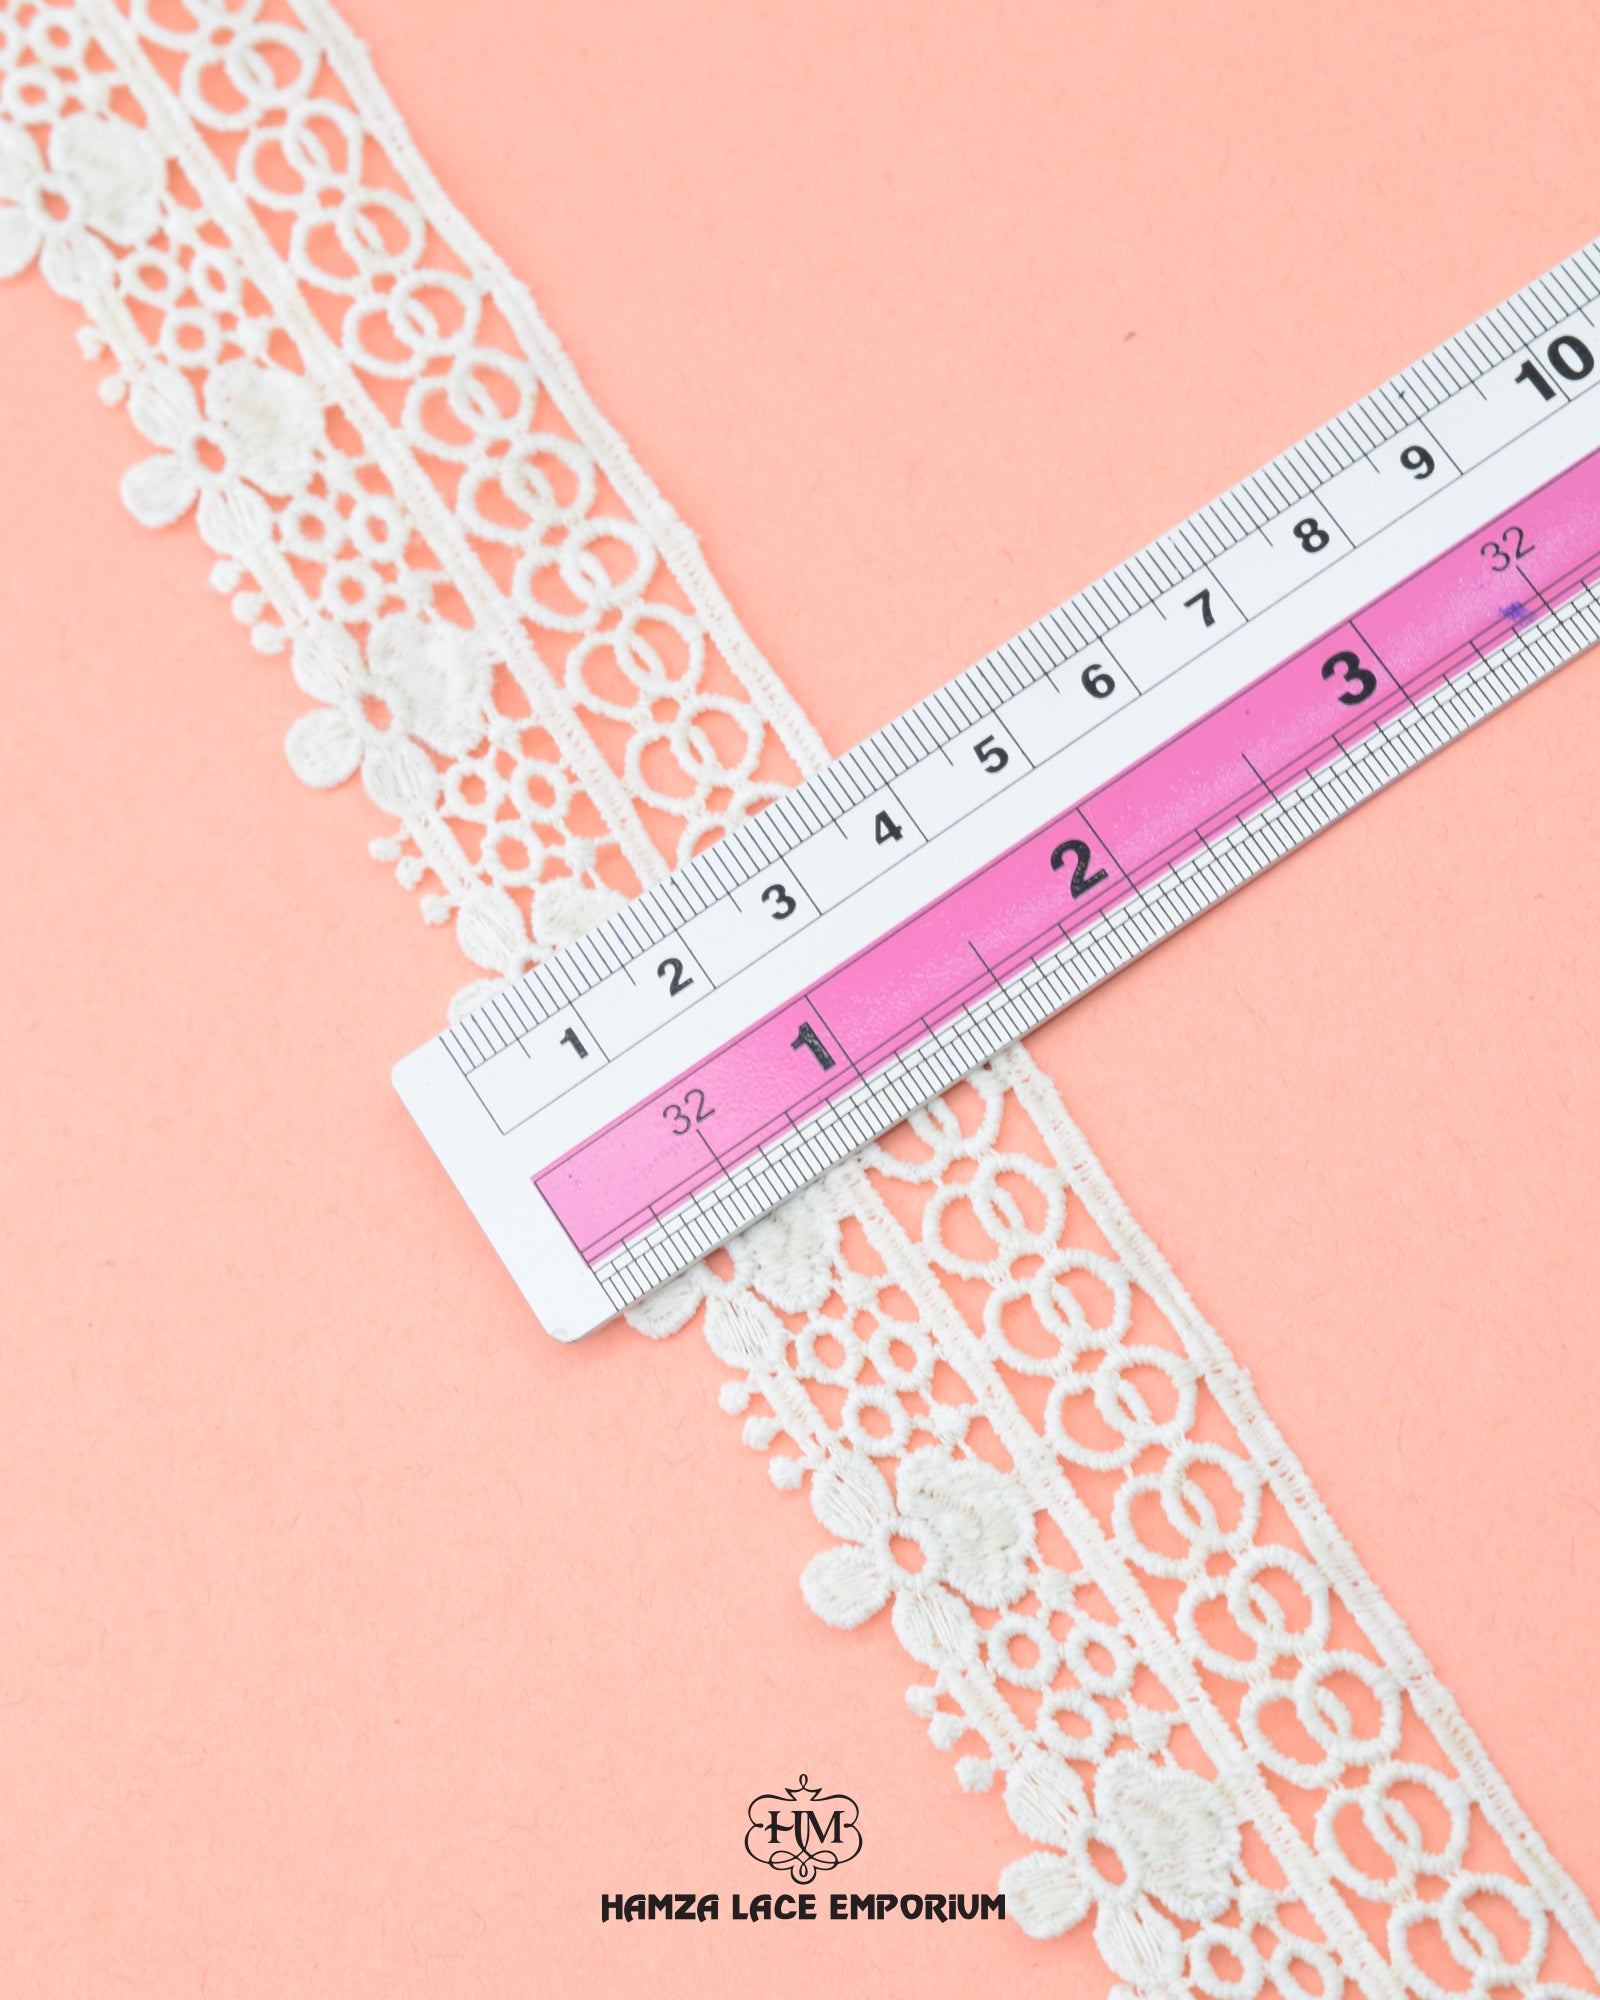 Size of the 'Edging Flower Lace 4681' is shown as '1.5' inches with the help of a ruler